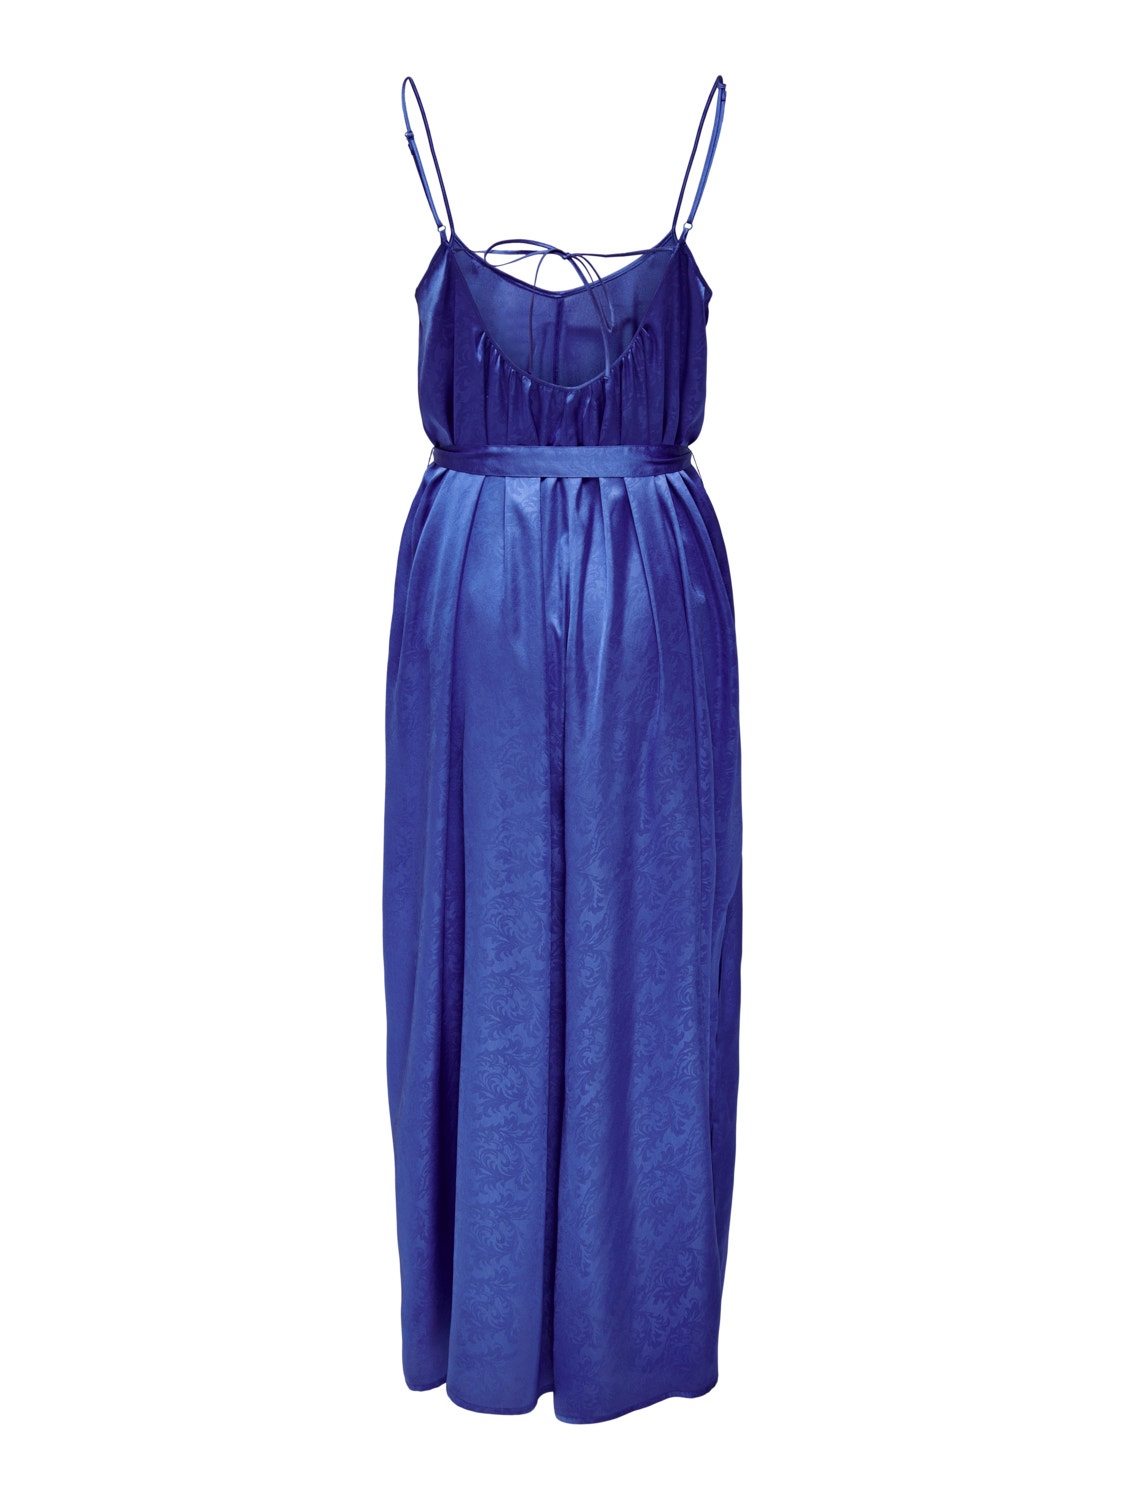 ONLY Relaxed Fit U-Neck Long dress -Dazzling Blue - 15292988